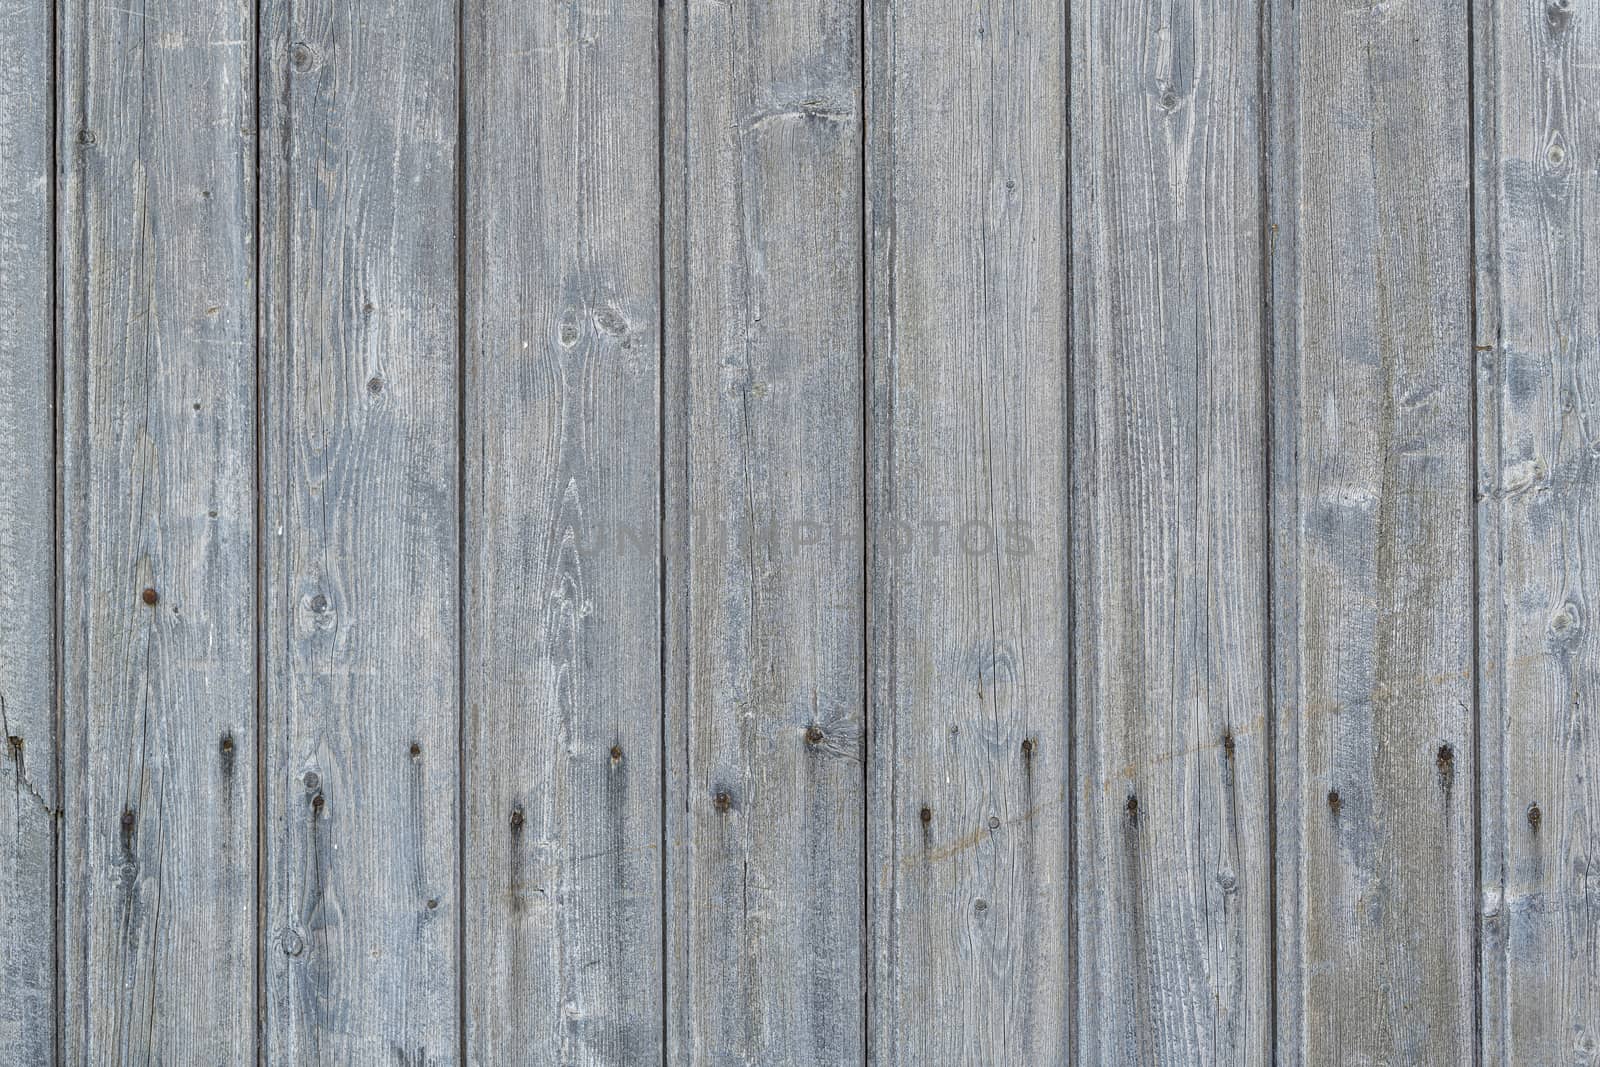 Background photo of weathered old gray wooden scrap with rusted nails shown full screen